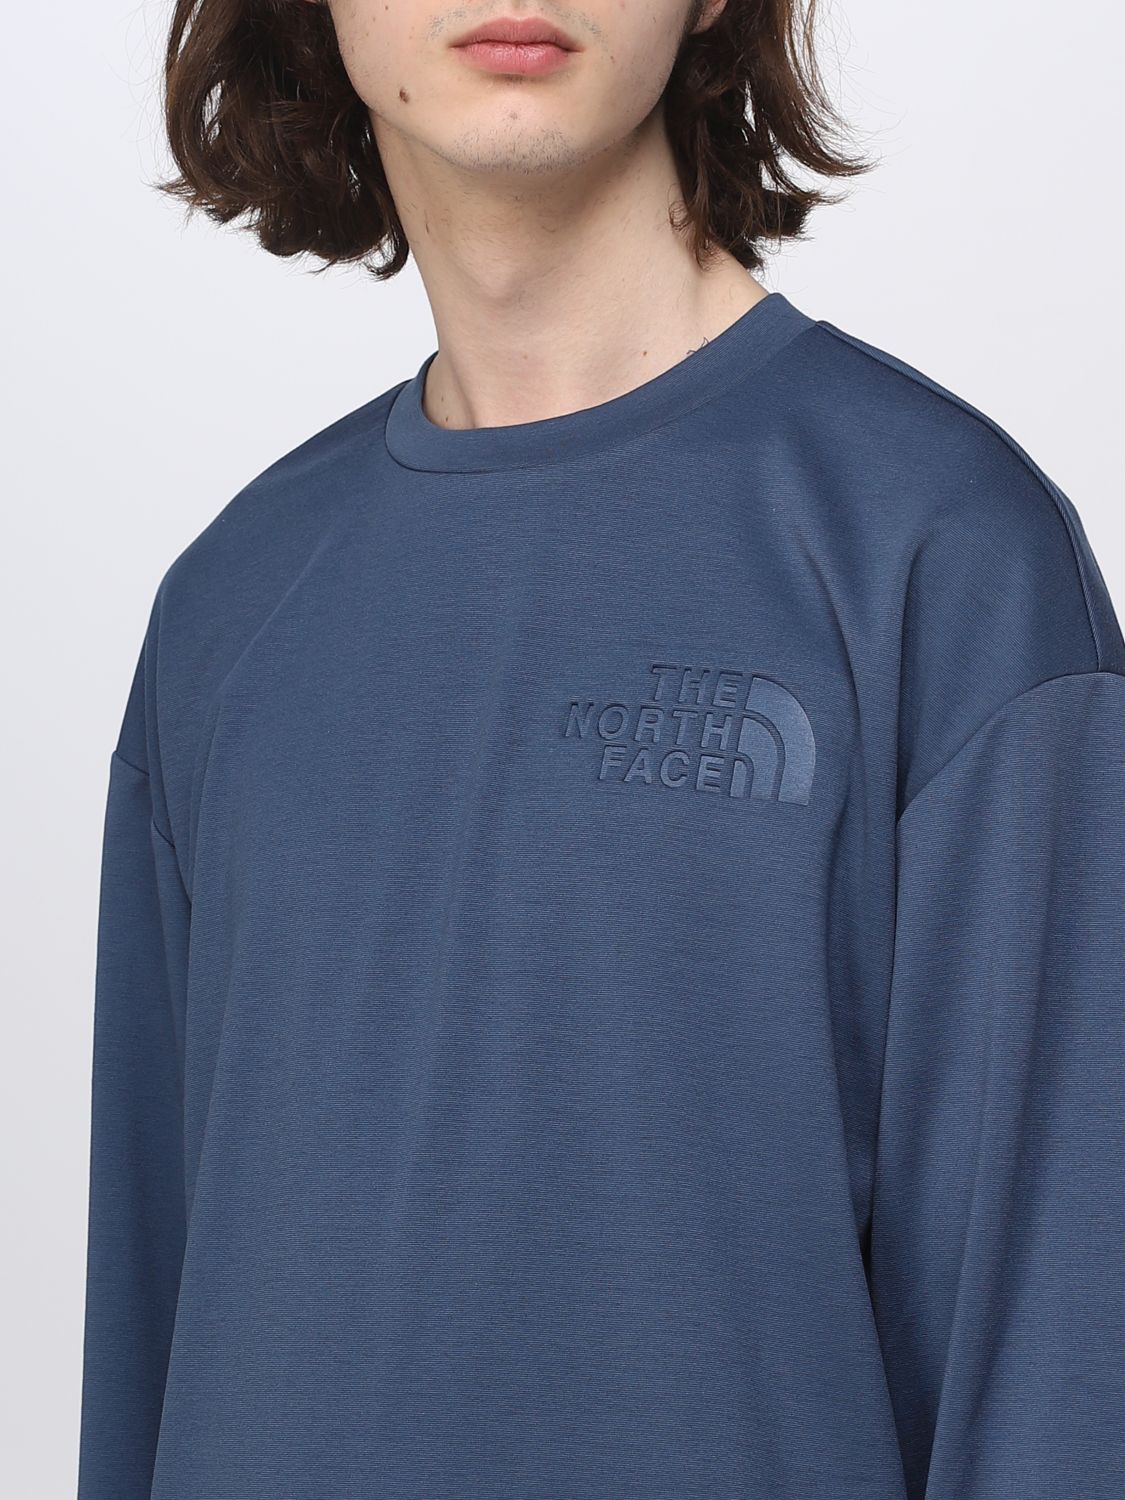 THE NORTH FACE: sweatshirt for man - Blue | The North Face sweatshirt ...